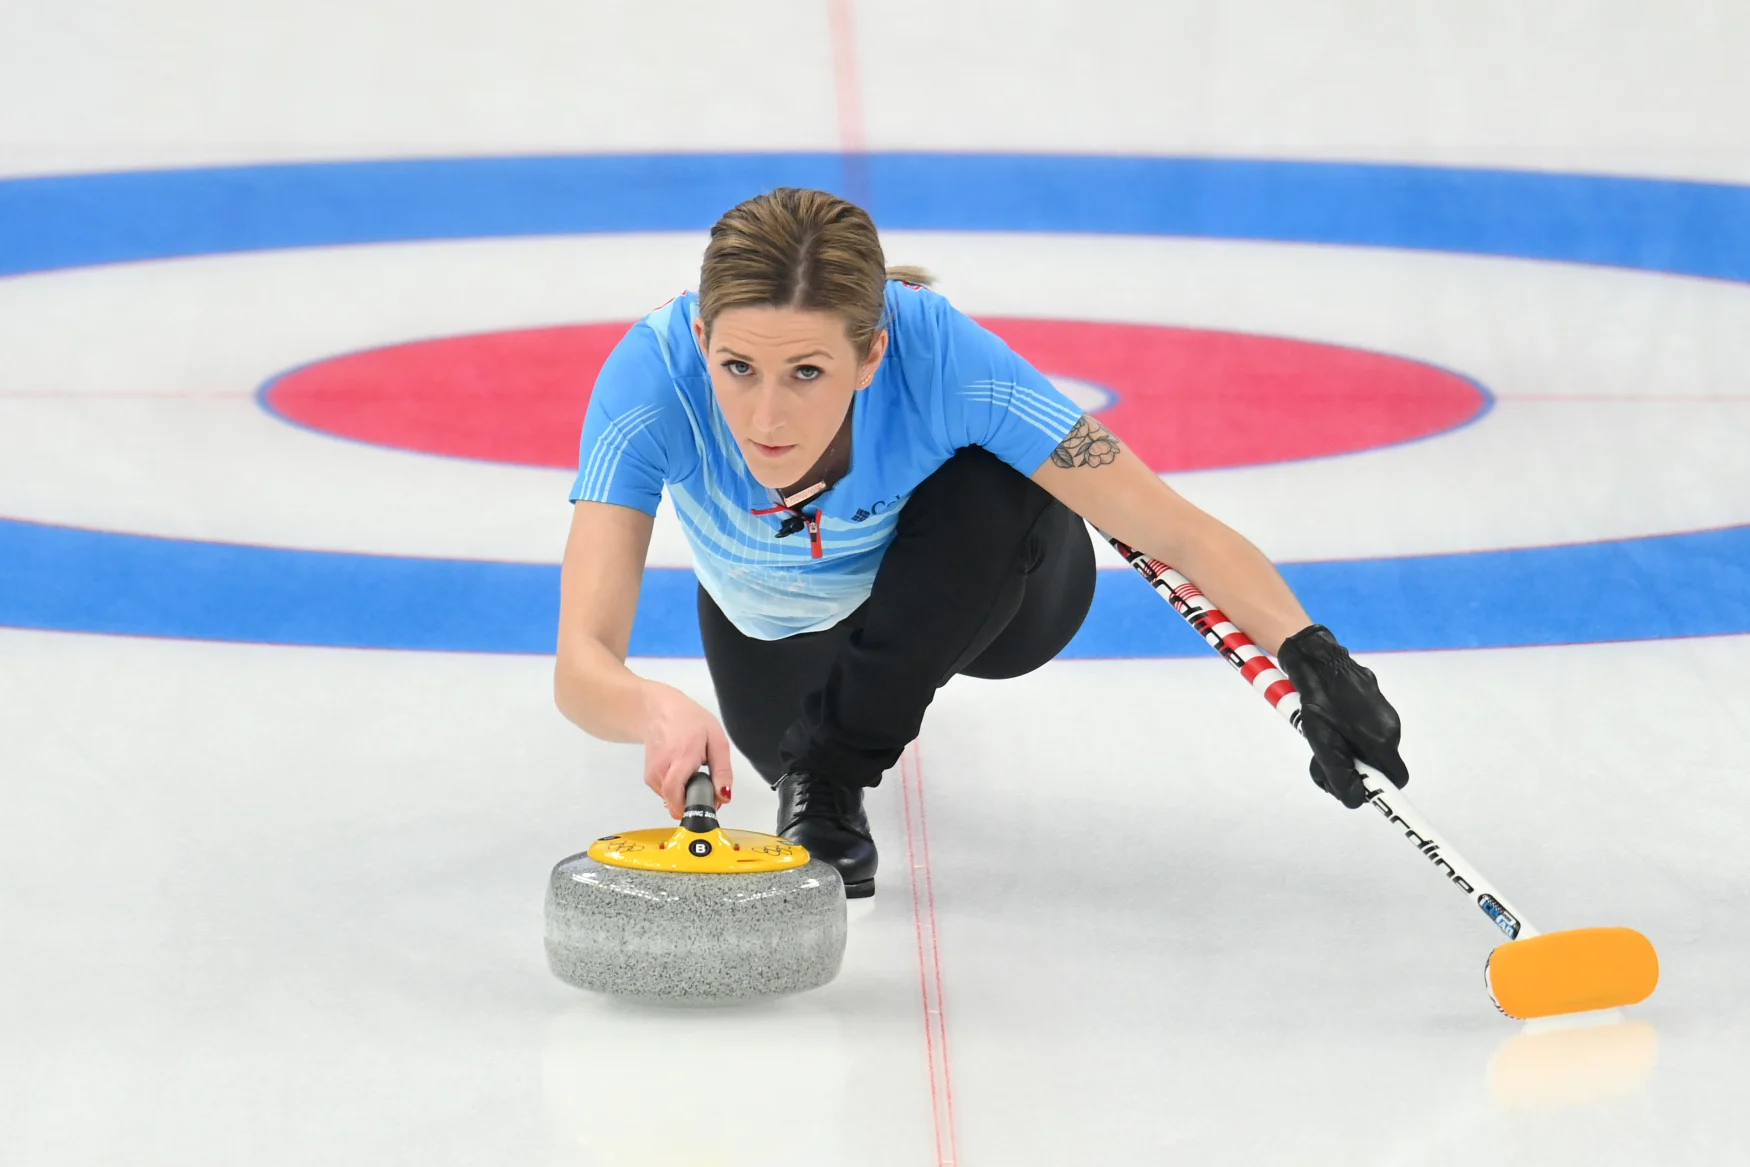 BEIJING, CHINA - FEBRUARY 02: Victoria Persinger of Team United States competes during the Curling Mixed Doubles Round Robin ahead of the Beijing 2022 Winter Olympics at National Aquatics Centre on February 02, 2022 in Beijing, China. (Photo by Justin Setterfield/Getty Images)